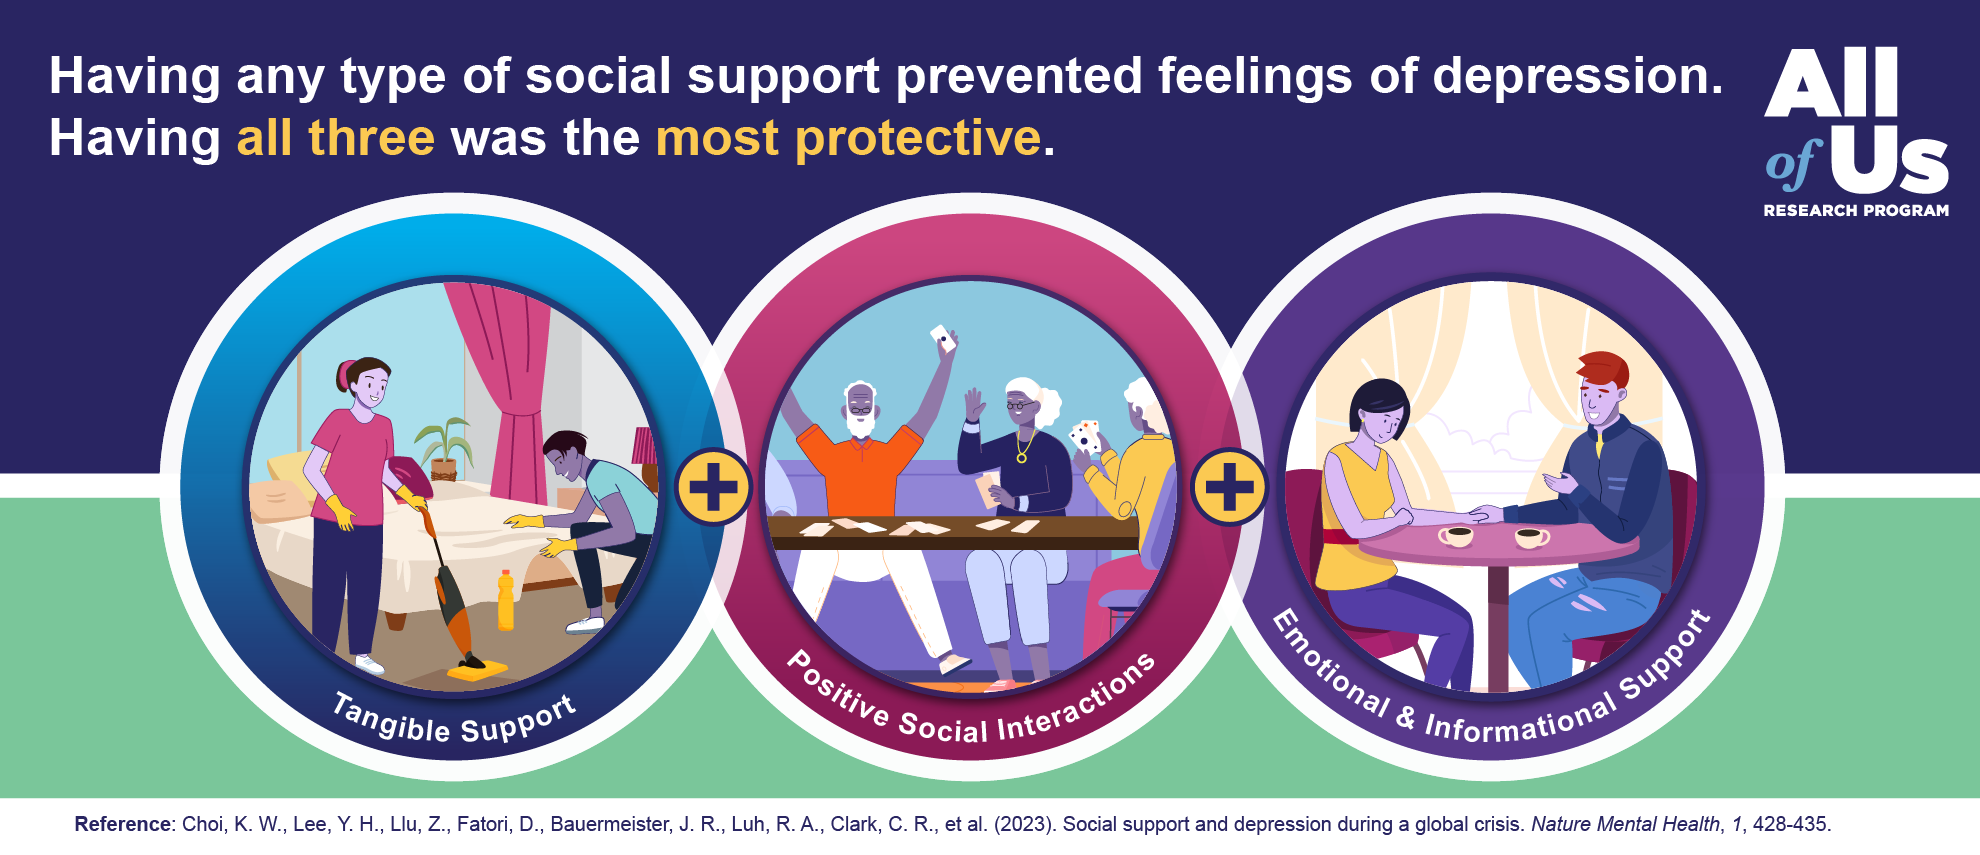 Having any type of social support prevented feelings of depression. Having all three was the most protective. An illustration of two people doing housework, labeled “tangible support”; people playing cards, labeled “positive social interactions”; and two people having coffee, labeled emotional and informational support. Logo of the All of Us Research Program.